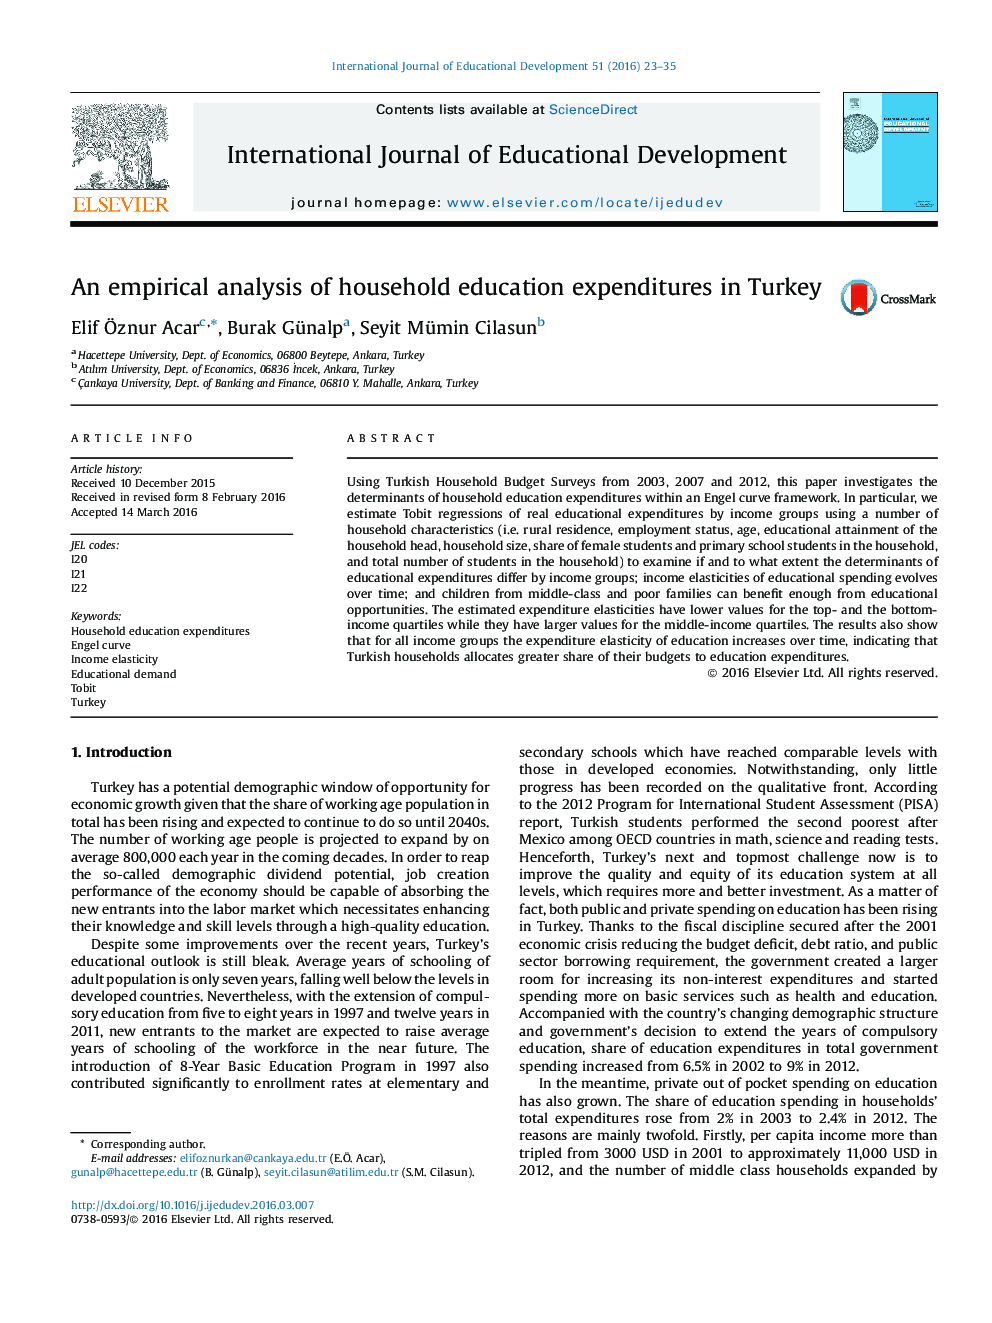 An empirical analysis of household education expenditures in Turkey